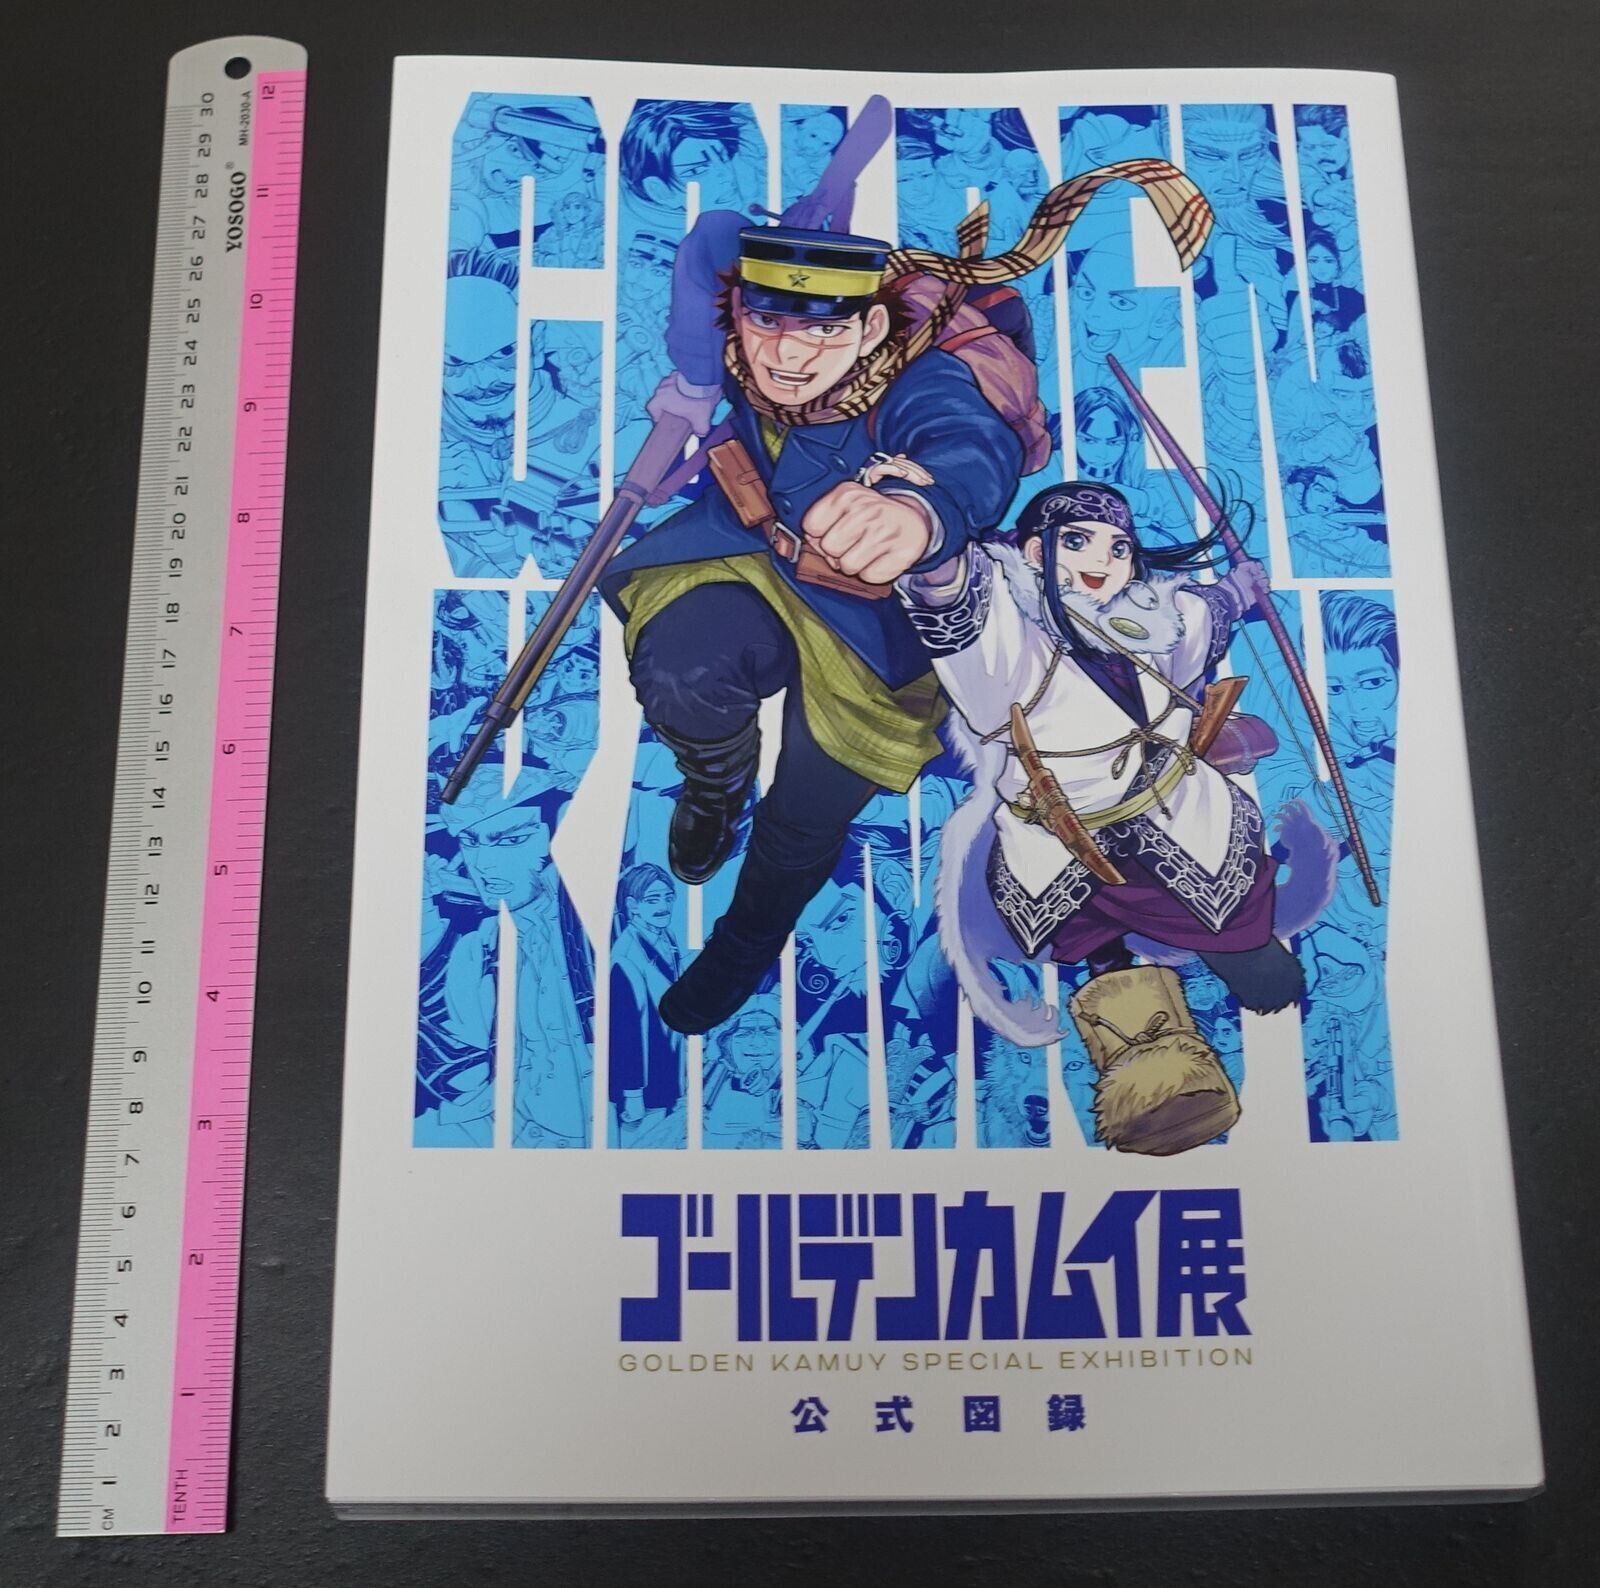 GOLDEN KAMUY SPECIAL EXHIBITION OFFICIAL PICTURE BOOK